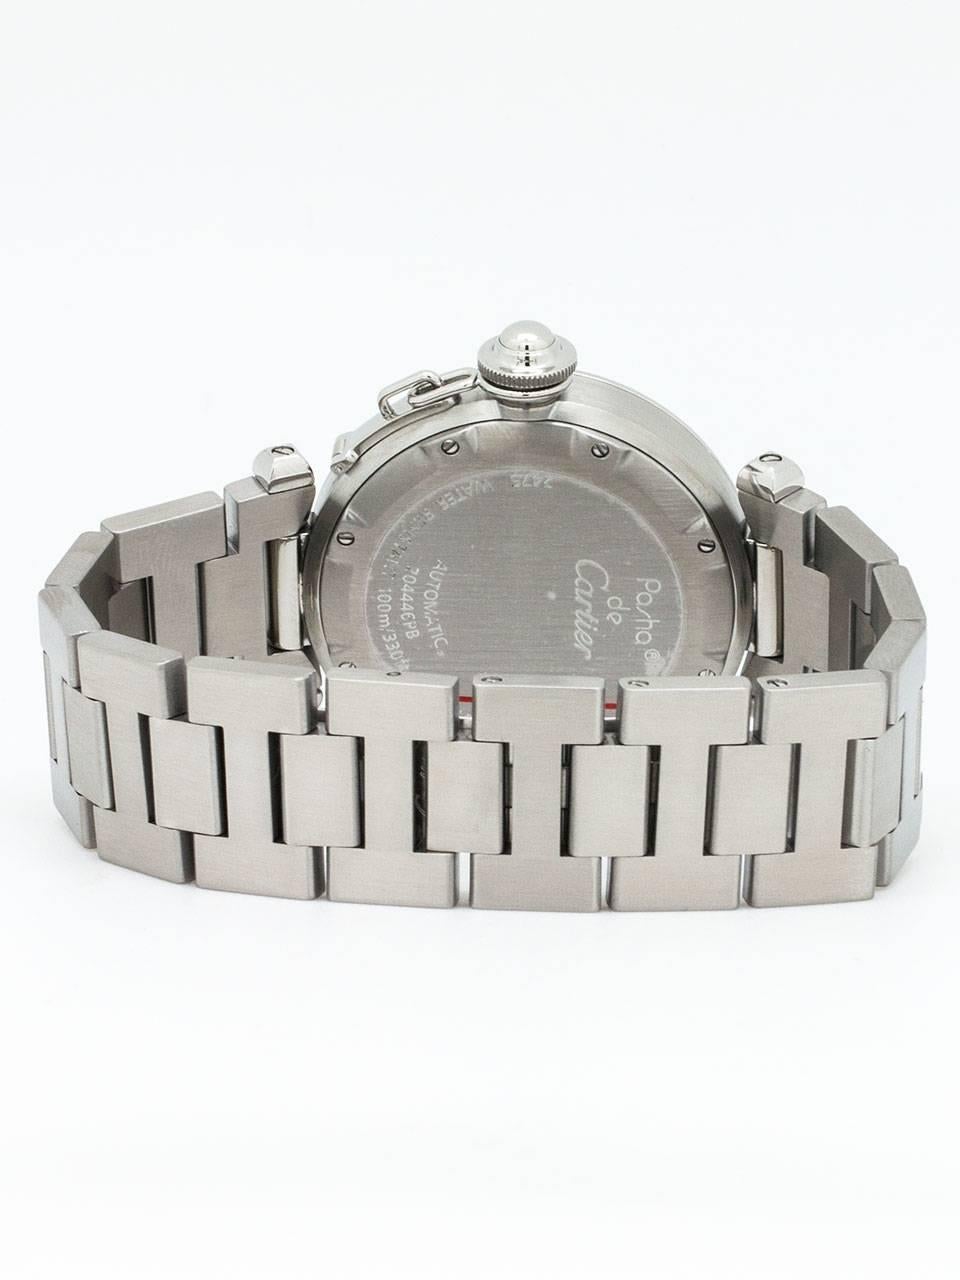 Women's or Men's Cartier Stainless Steel Pasha C Big Date Automatic Wristwatch, circa 2000s